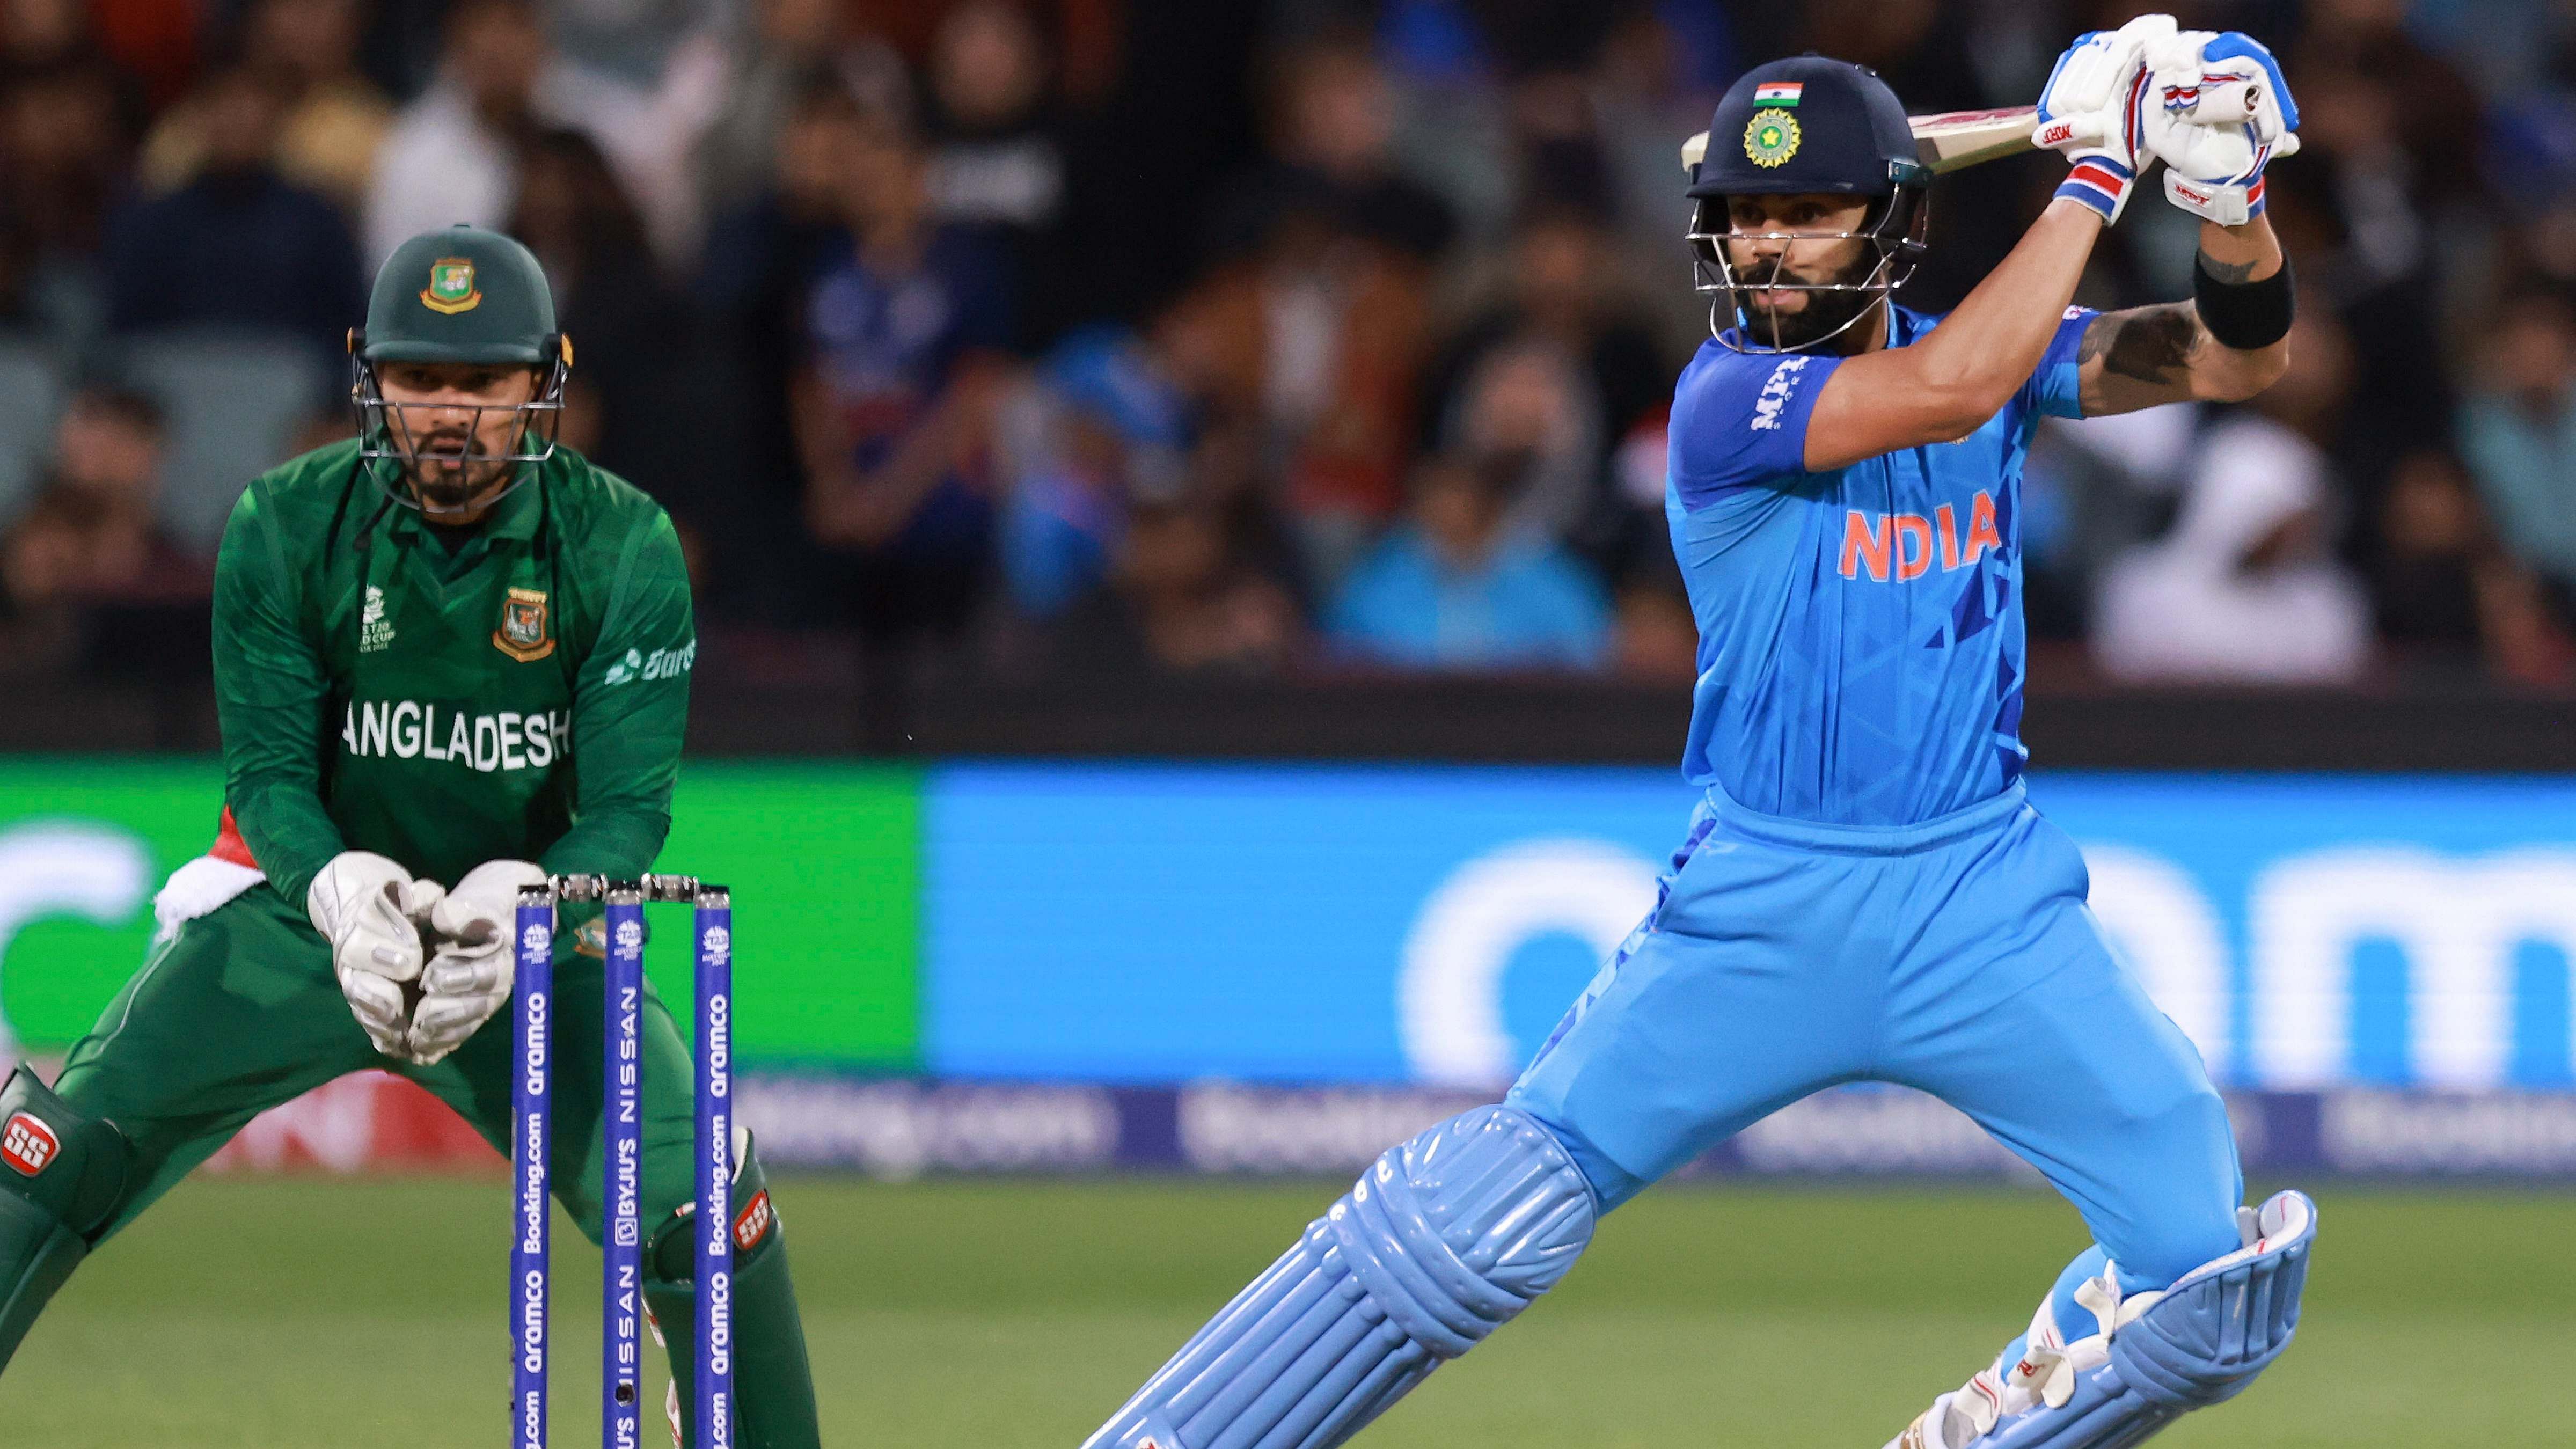 Virat Kohli bats during the T20 World Cup cricket match between India and Bangladesh in Adelaide. Credit: AP/PTI Photo